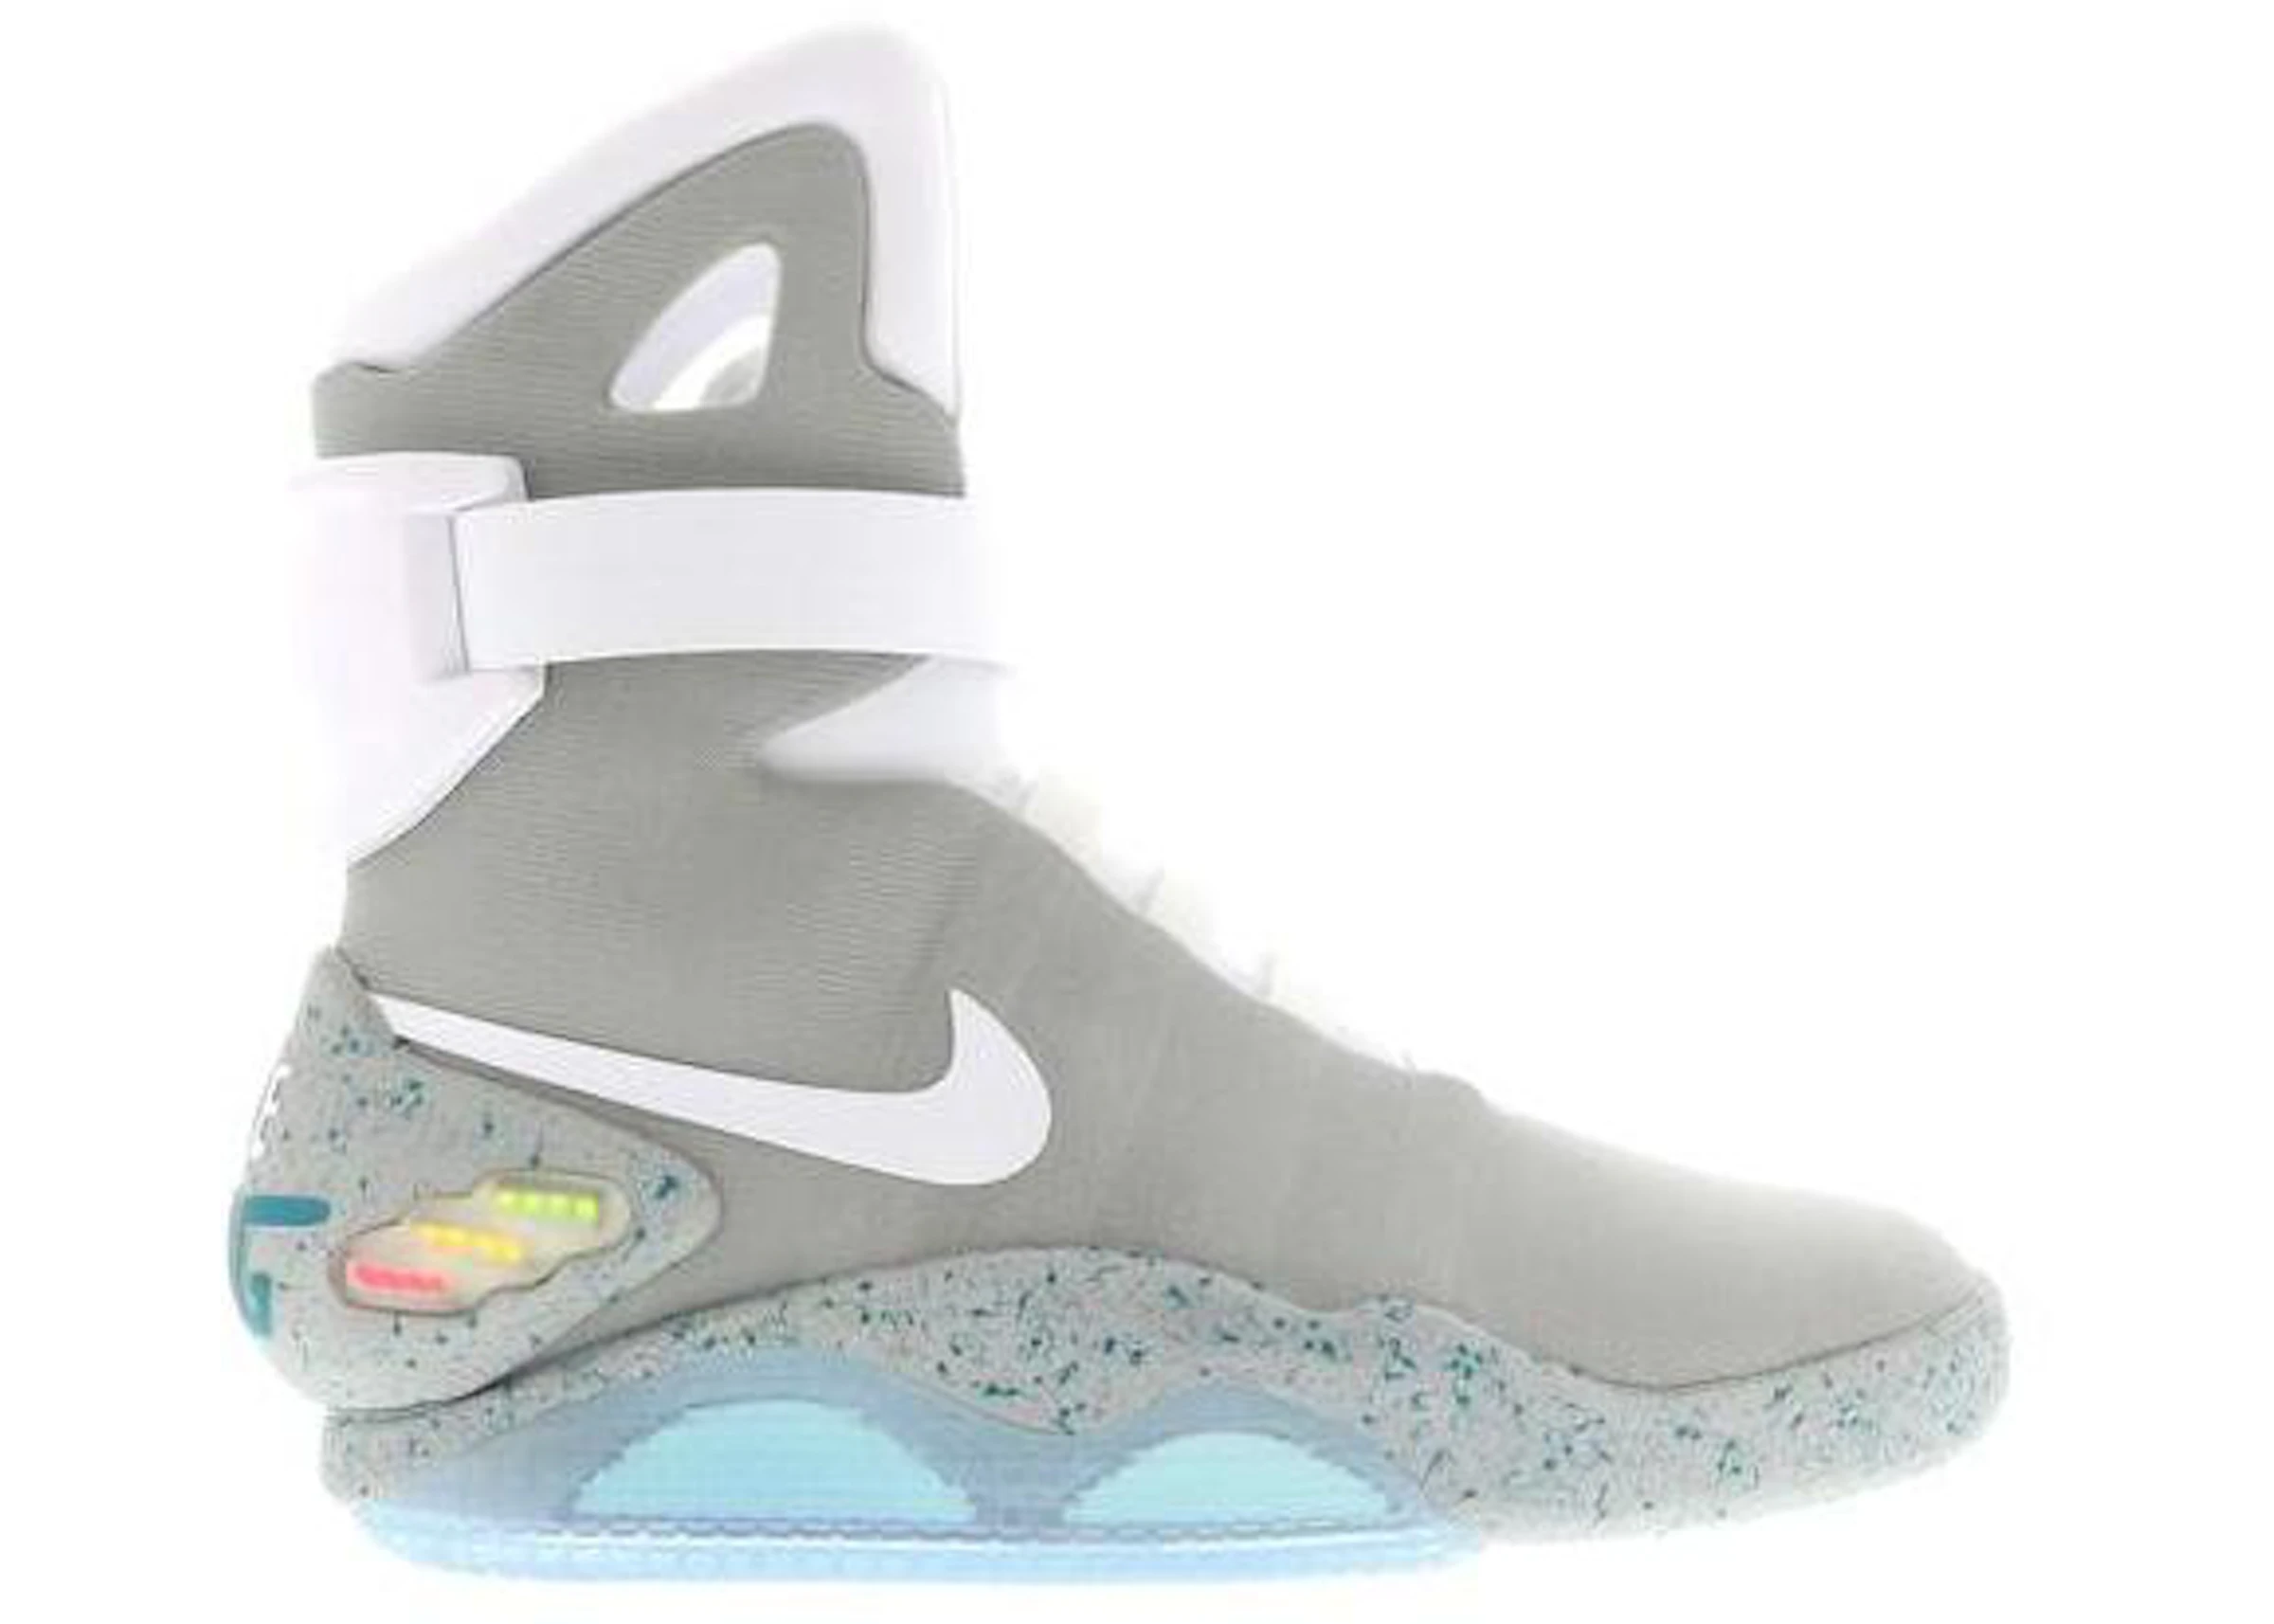 footsteps pitch enclosure Nike MAG Back to the Future (2016) - HO15MNOTHR402625849 - US